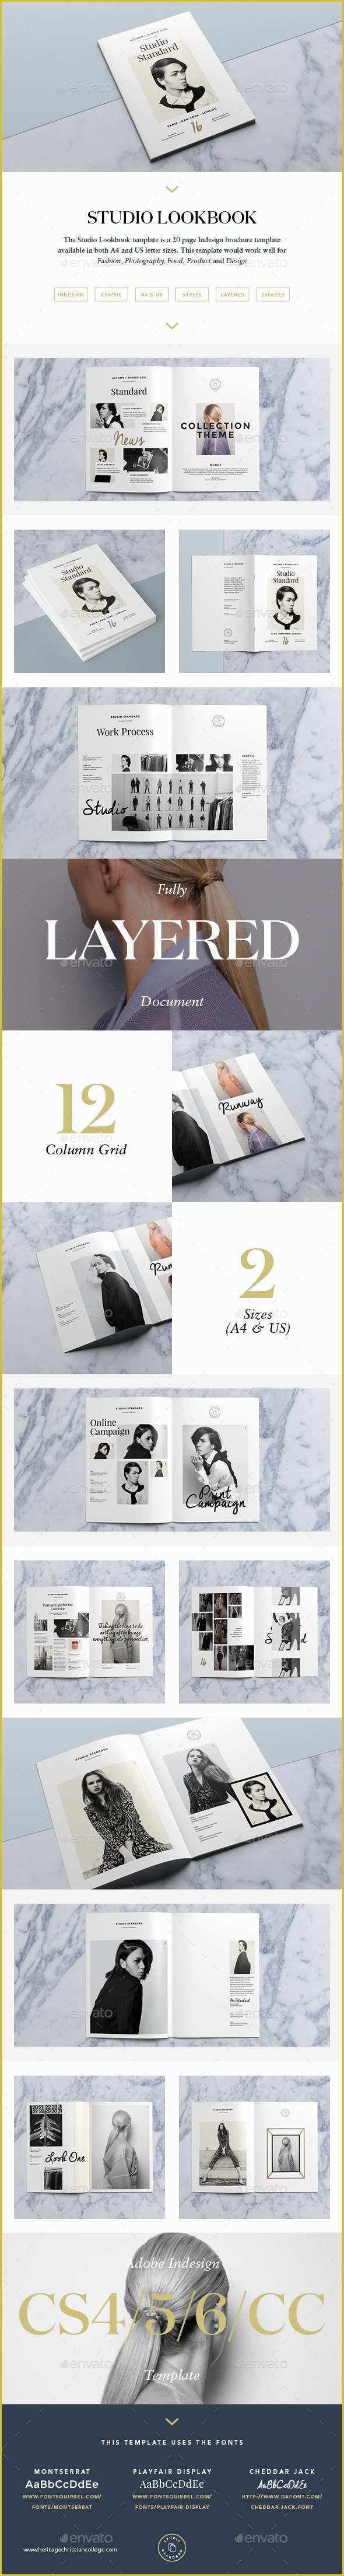 lookbook-template-free-of-free-indesign-lookbook-template-dondrup